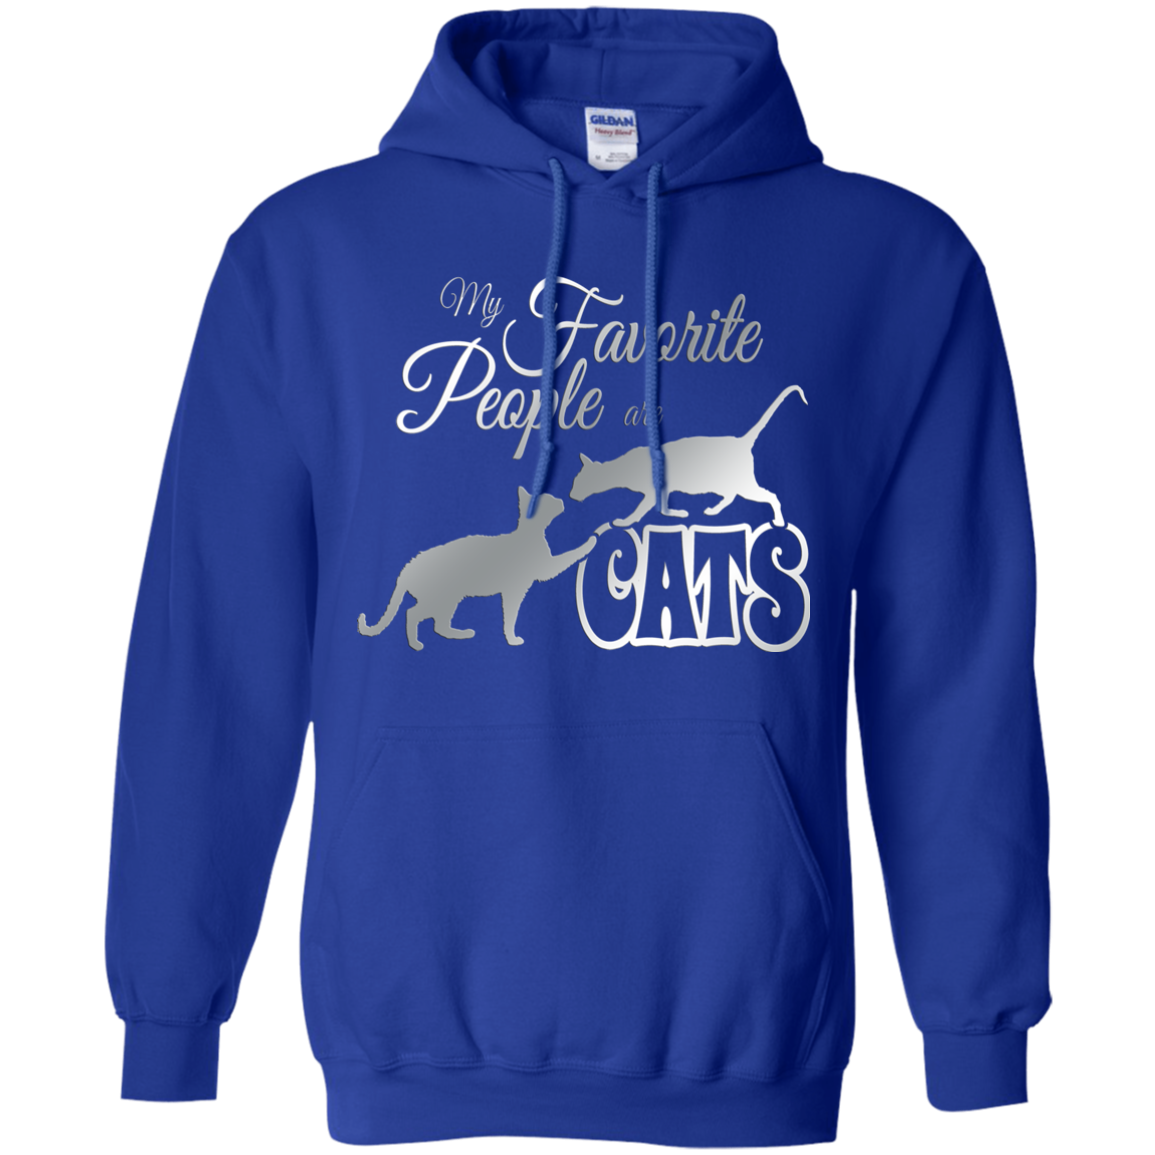 My Favorite People are Cats Pullover Hoodie